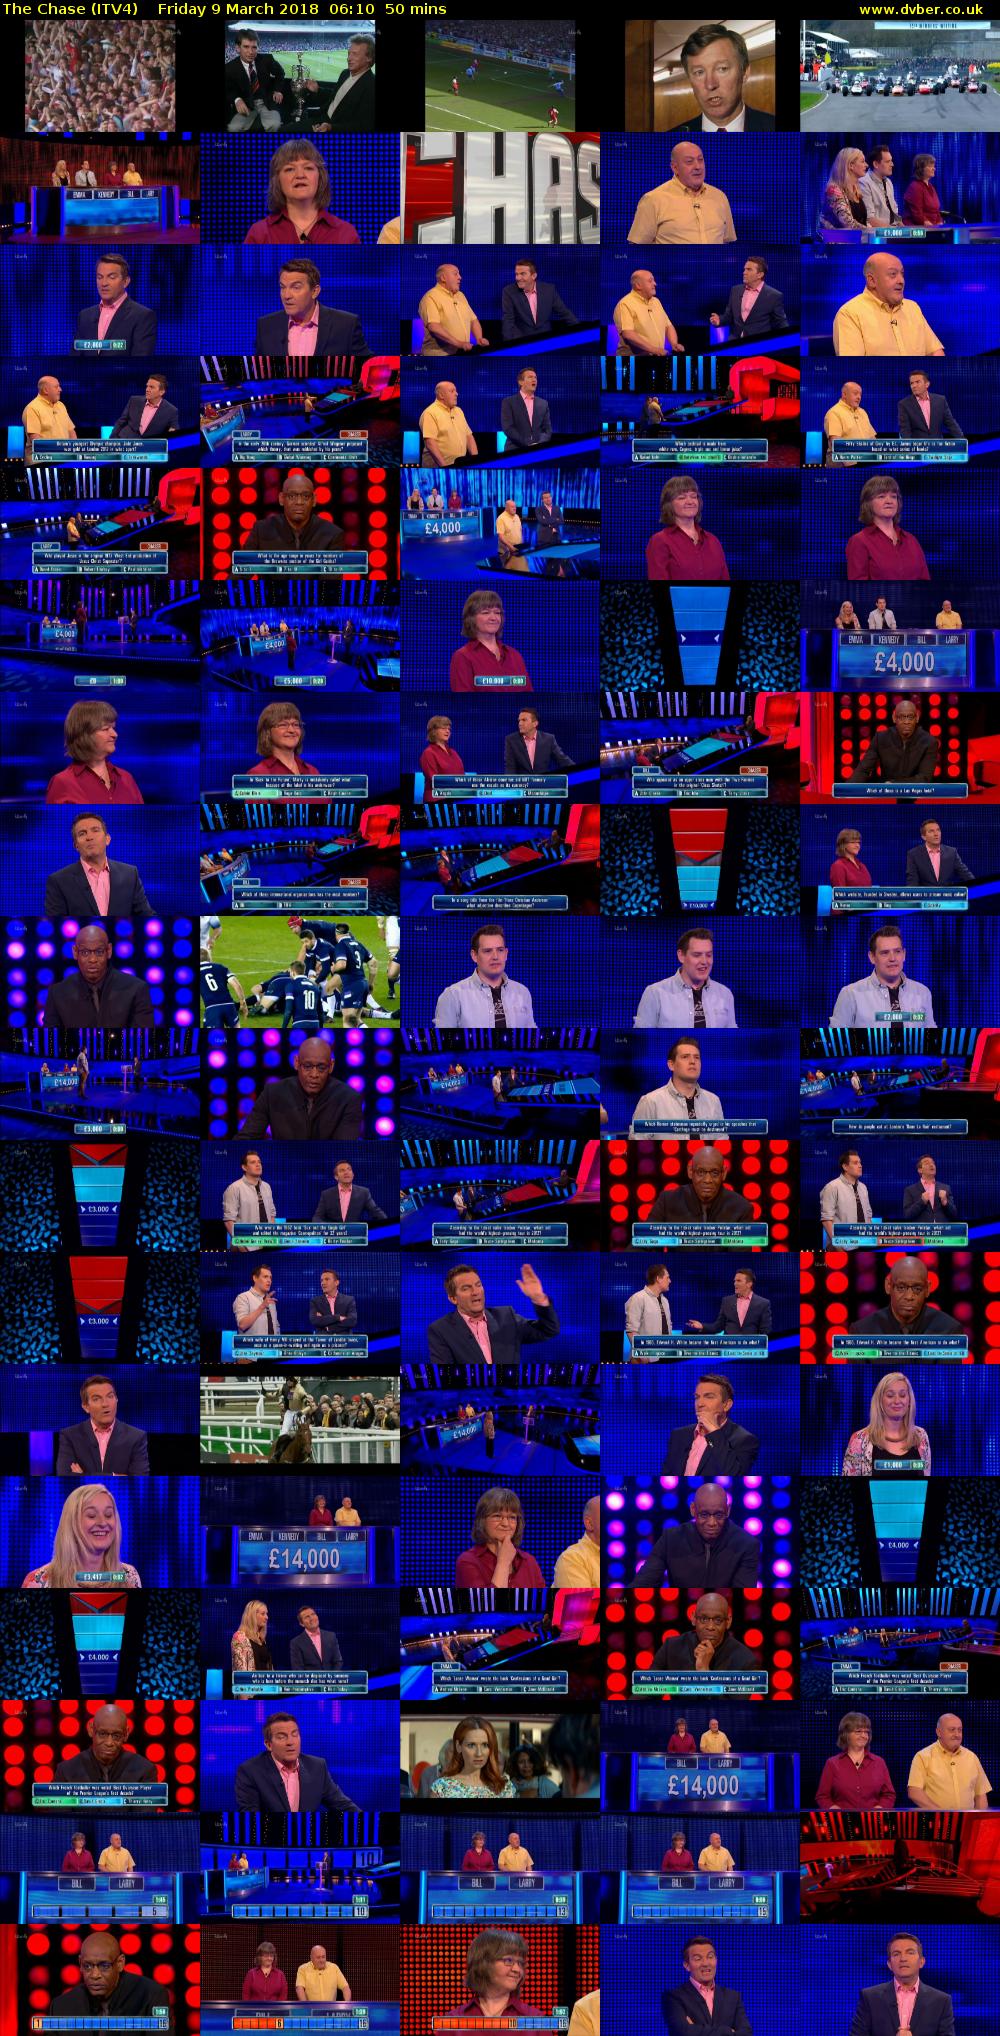 The Chase (ITV4) Friday 9 March 2018 06:10 - 07:00